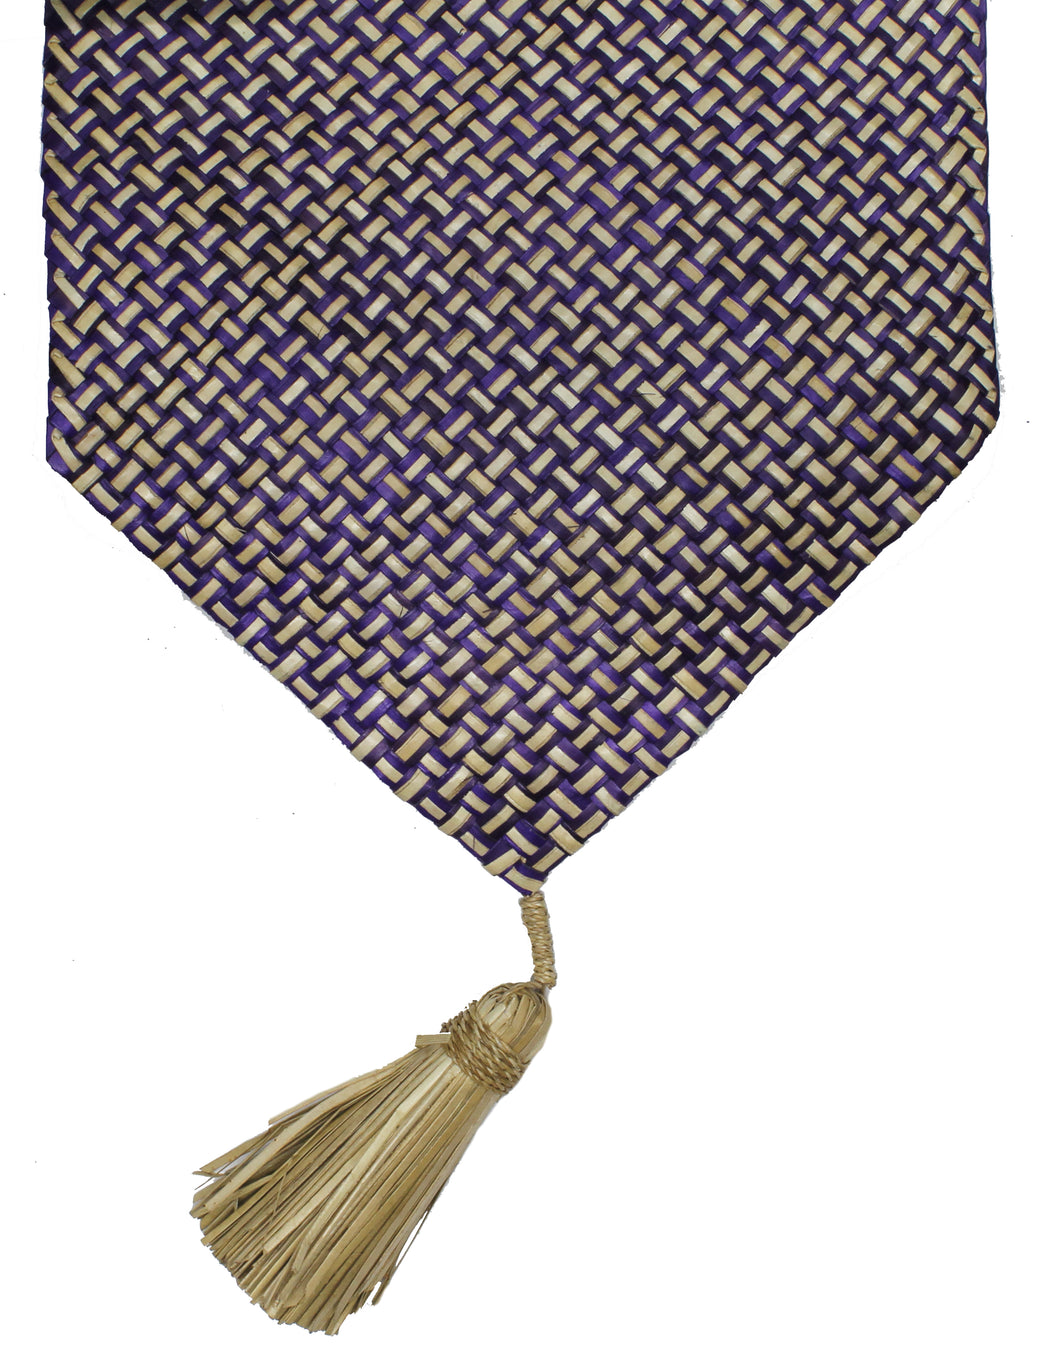 Table Runner Handwoven from Pandan Straw - Purple/Natural - Niger Bend